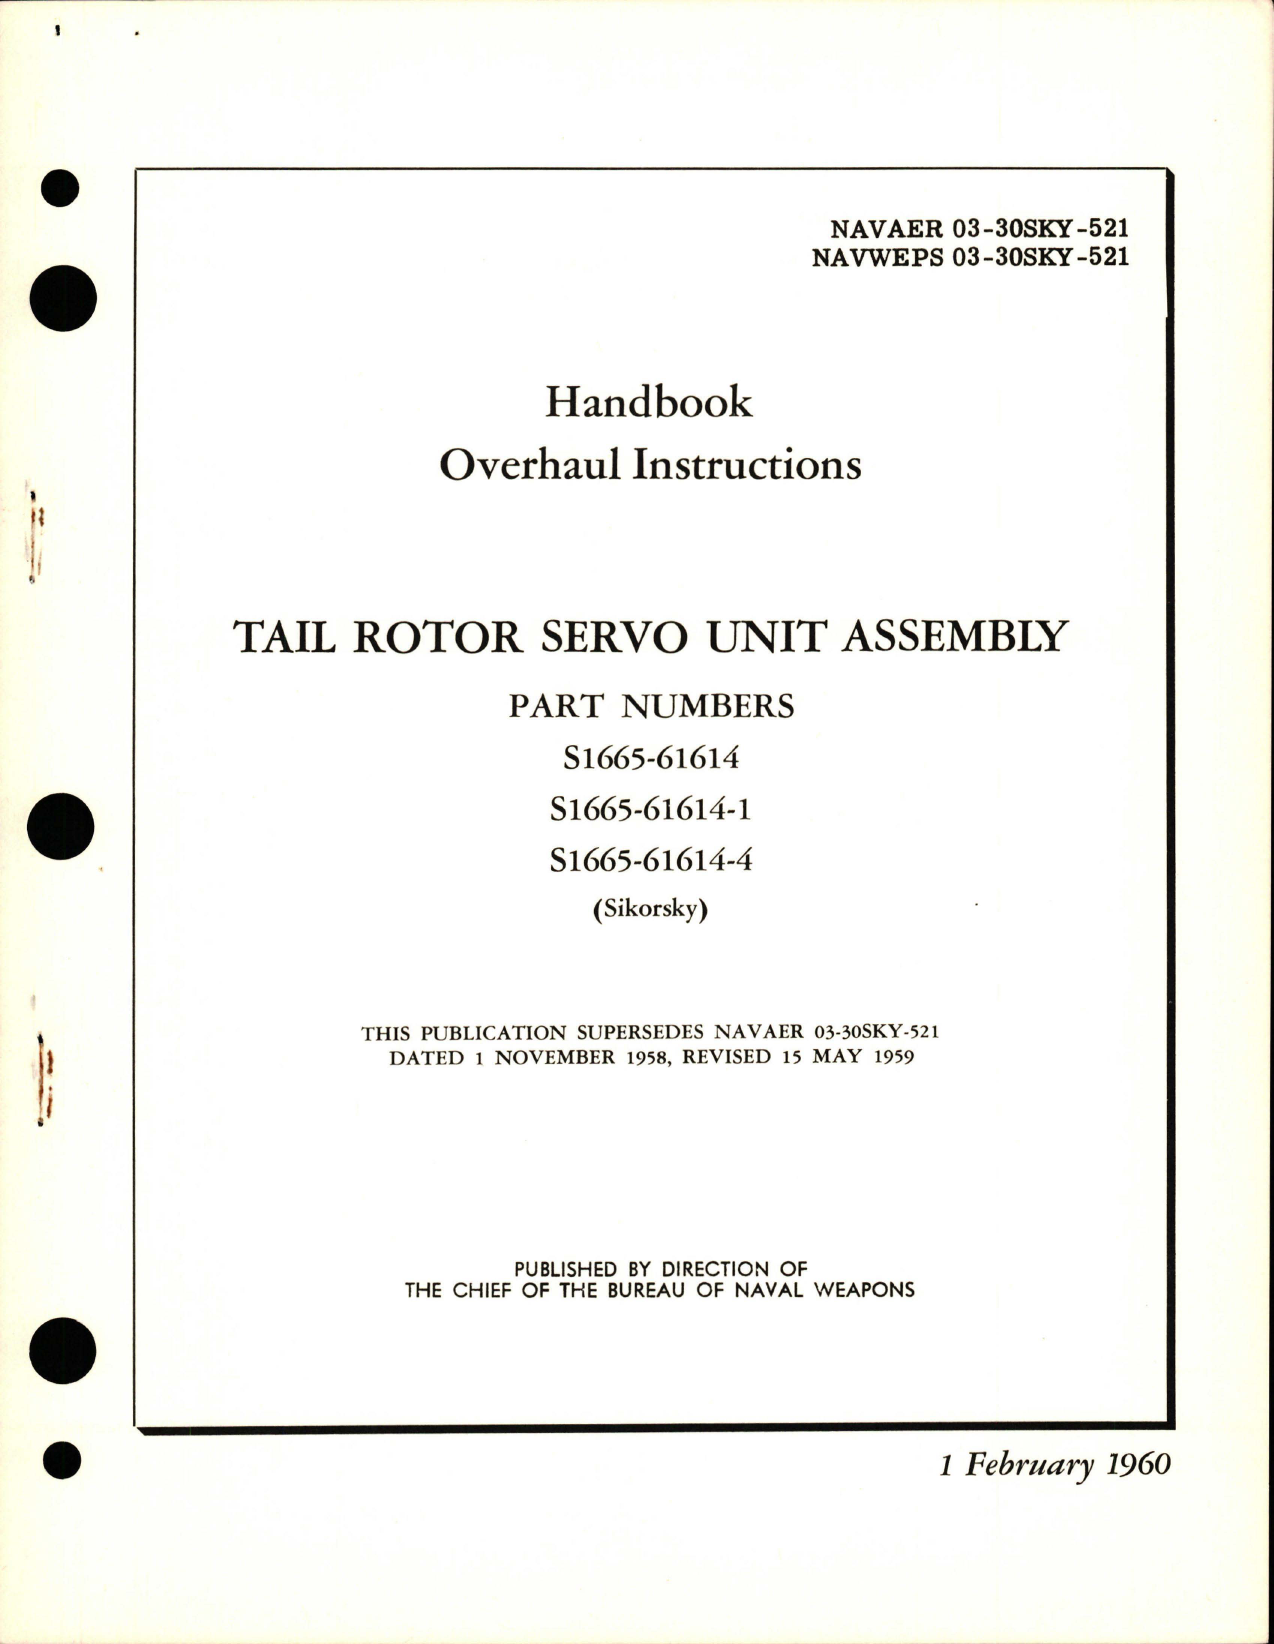 Sample page 1 from AirCorps Library document: Overhaul Instructions for Tail Rotor Servo Unit Assembly - Parts S1665-61614, S1665-61614-1, and S1665-61614-4